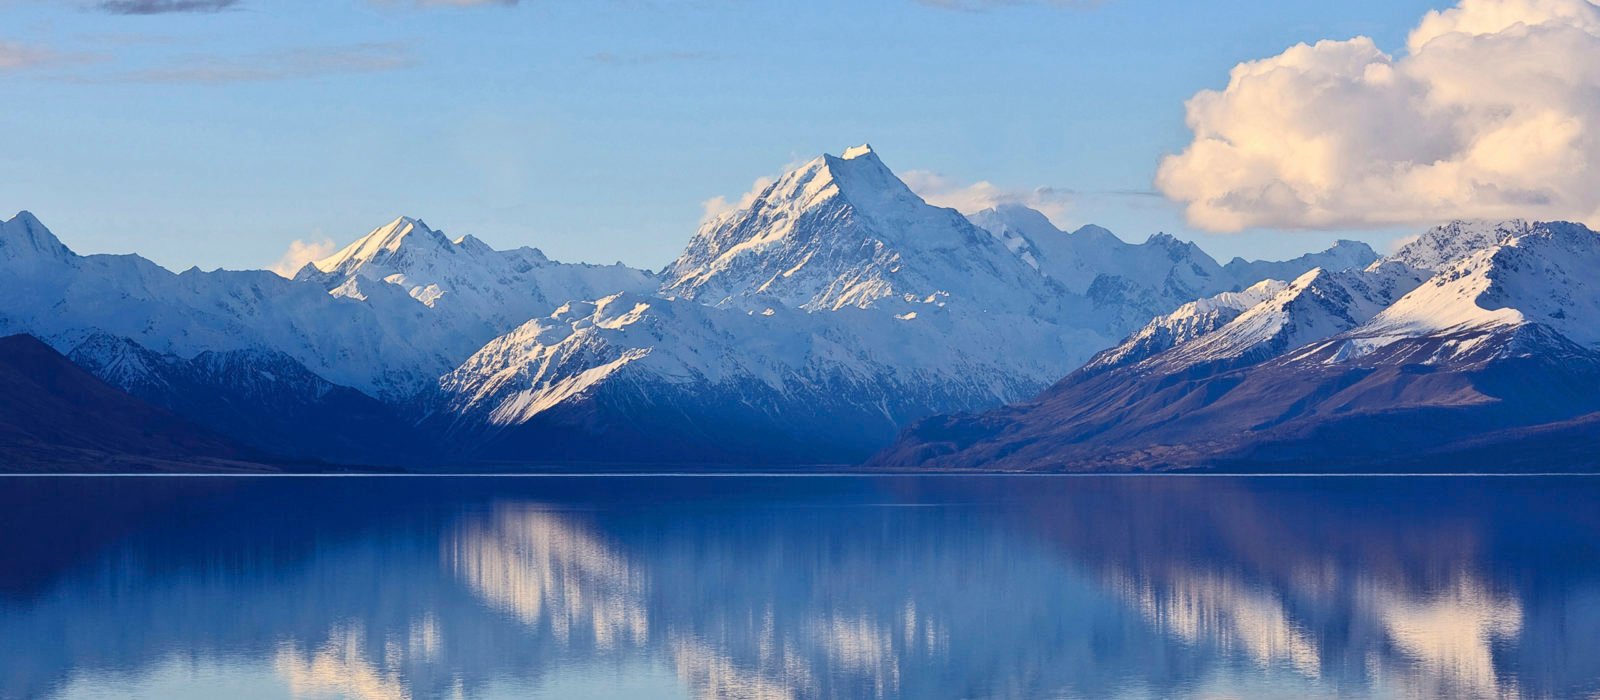 Must See Lakes Of New Zealand